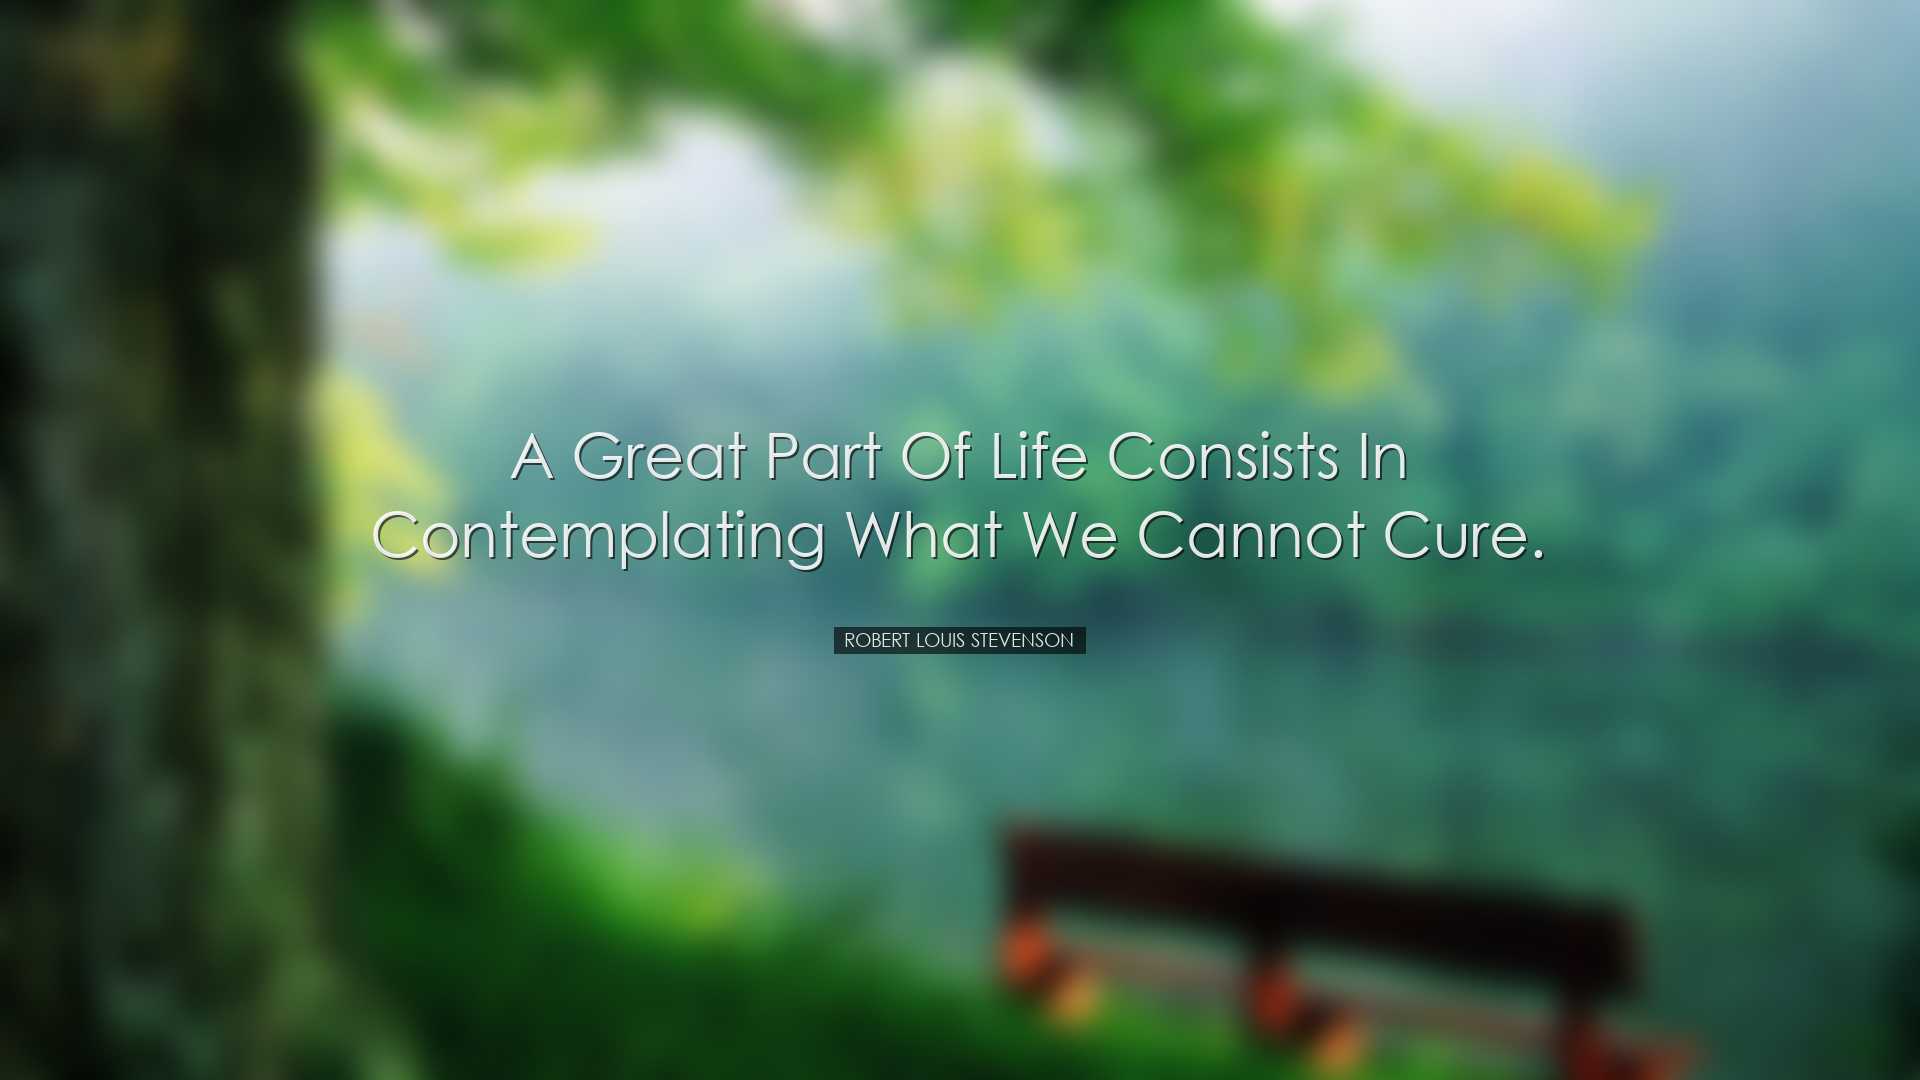 A great part of life consists in contemplating what we cannot cure